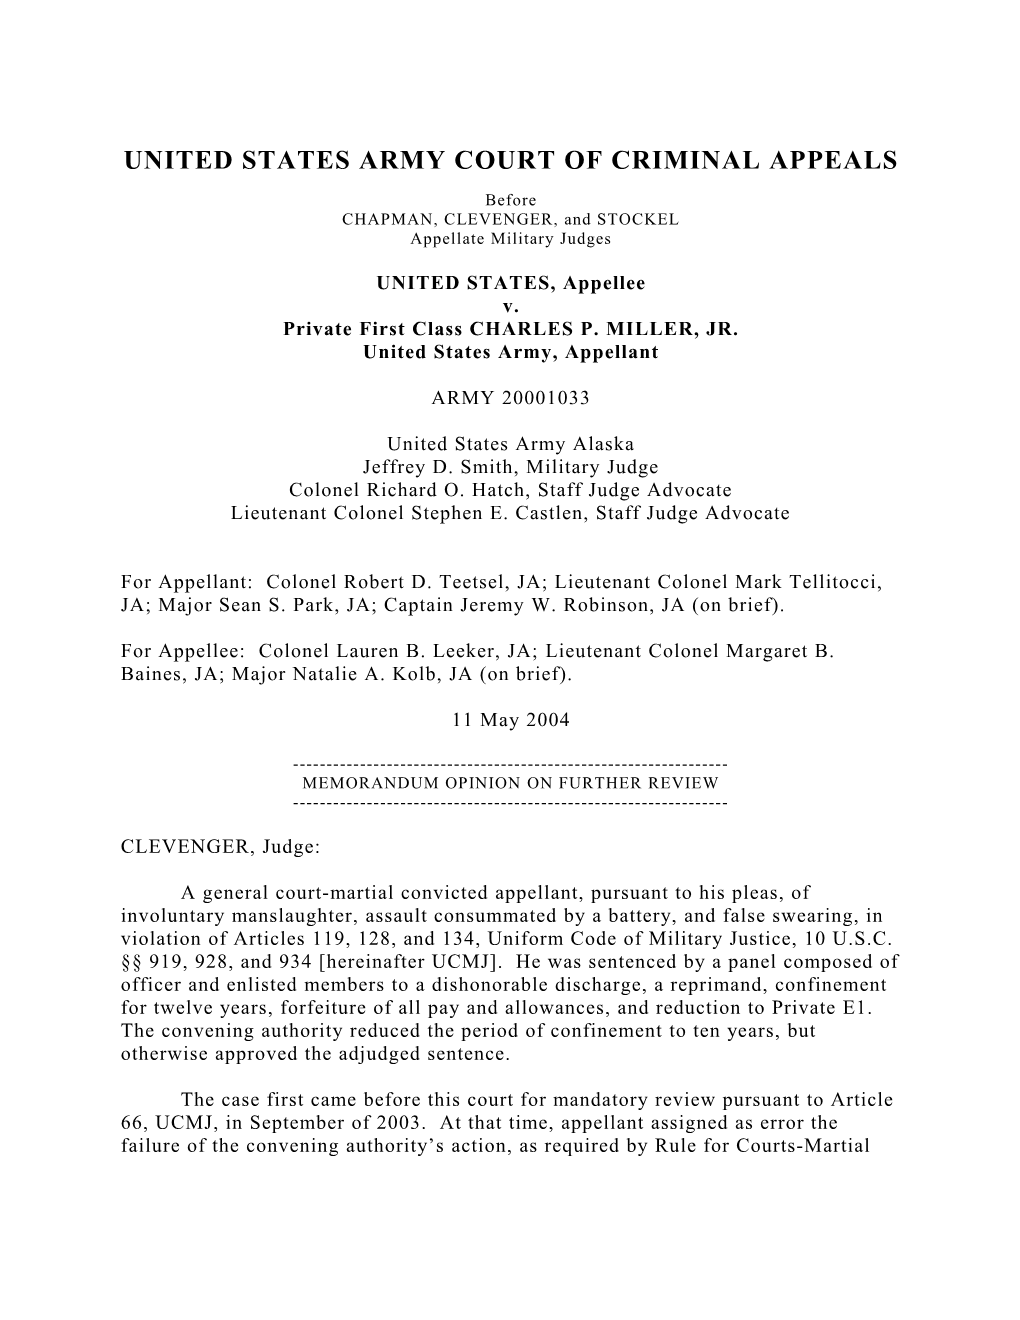 United States Army Court of Criminal Appeals s5